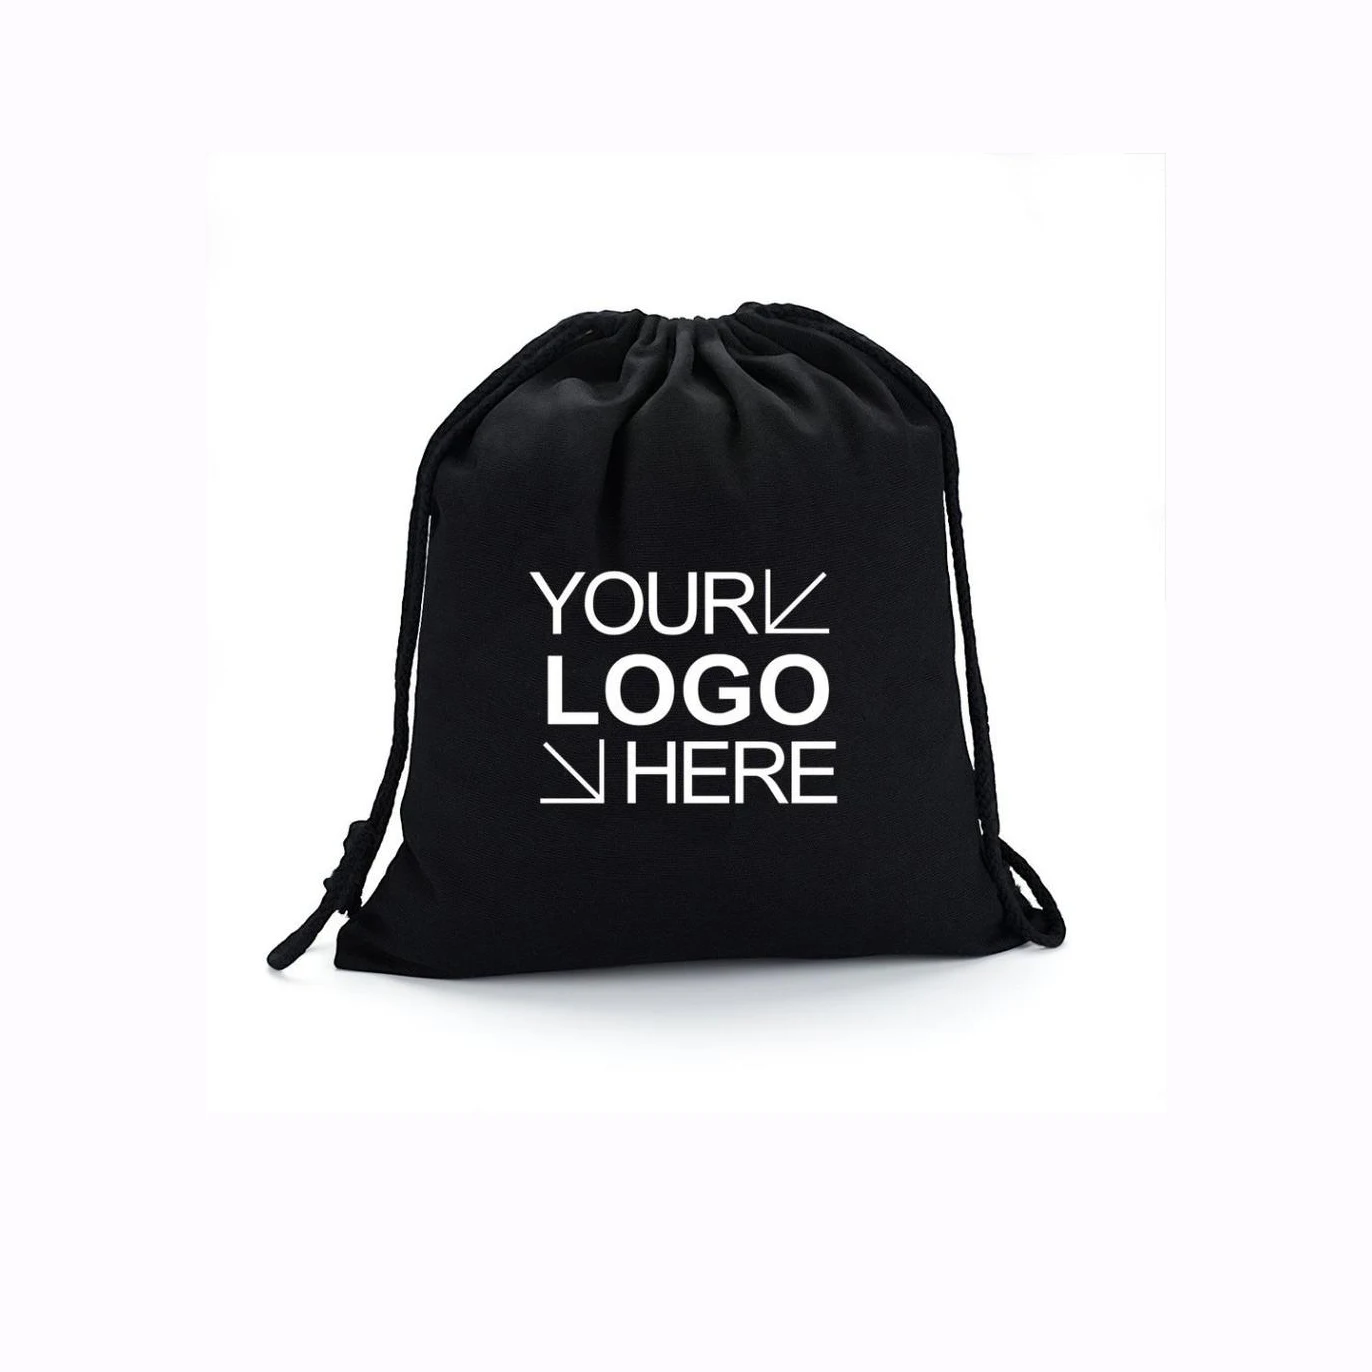 Customized Cheap Backpack for Kids Bag Black Fabric Sports Canvas Draw String Bag Drawstring Bag Accept Customized Logo CN;ZHE